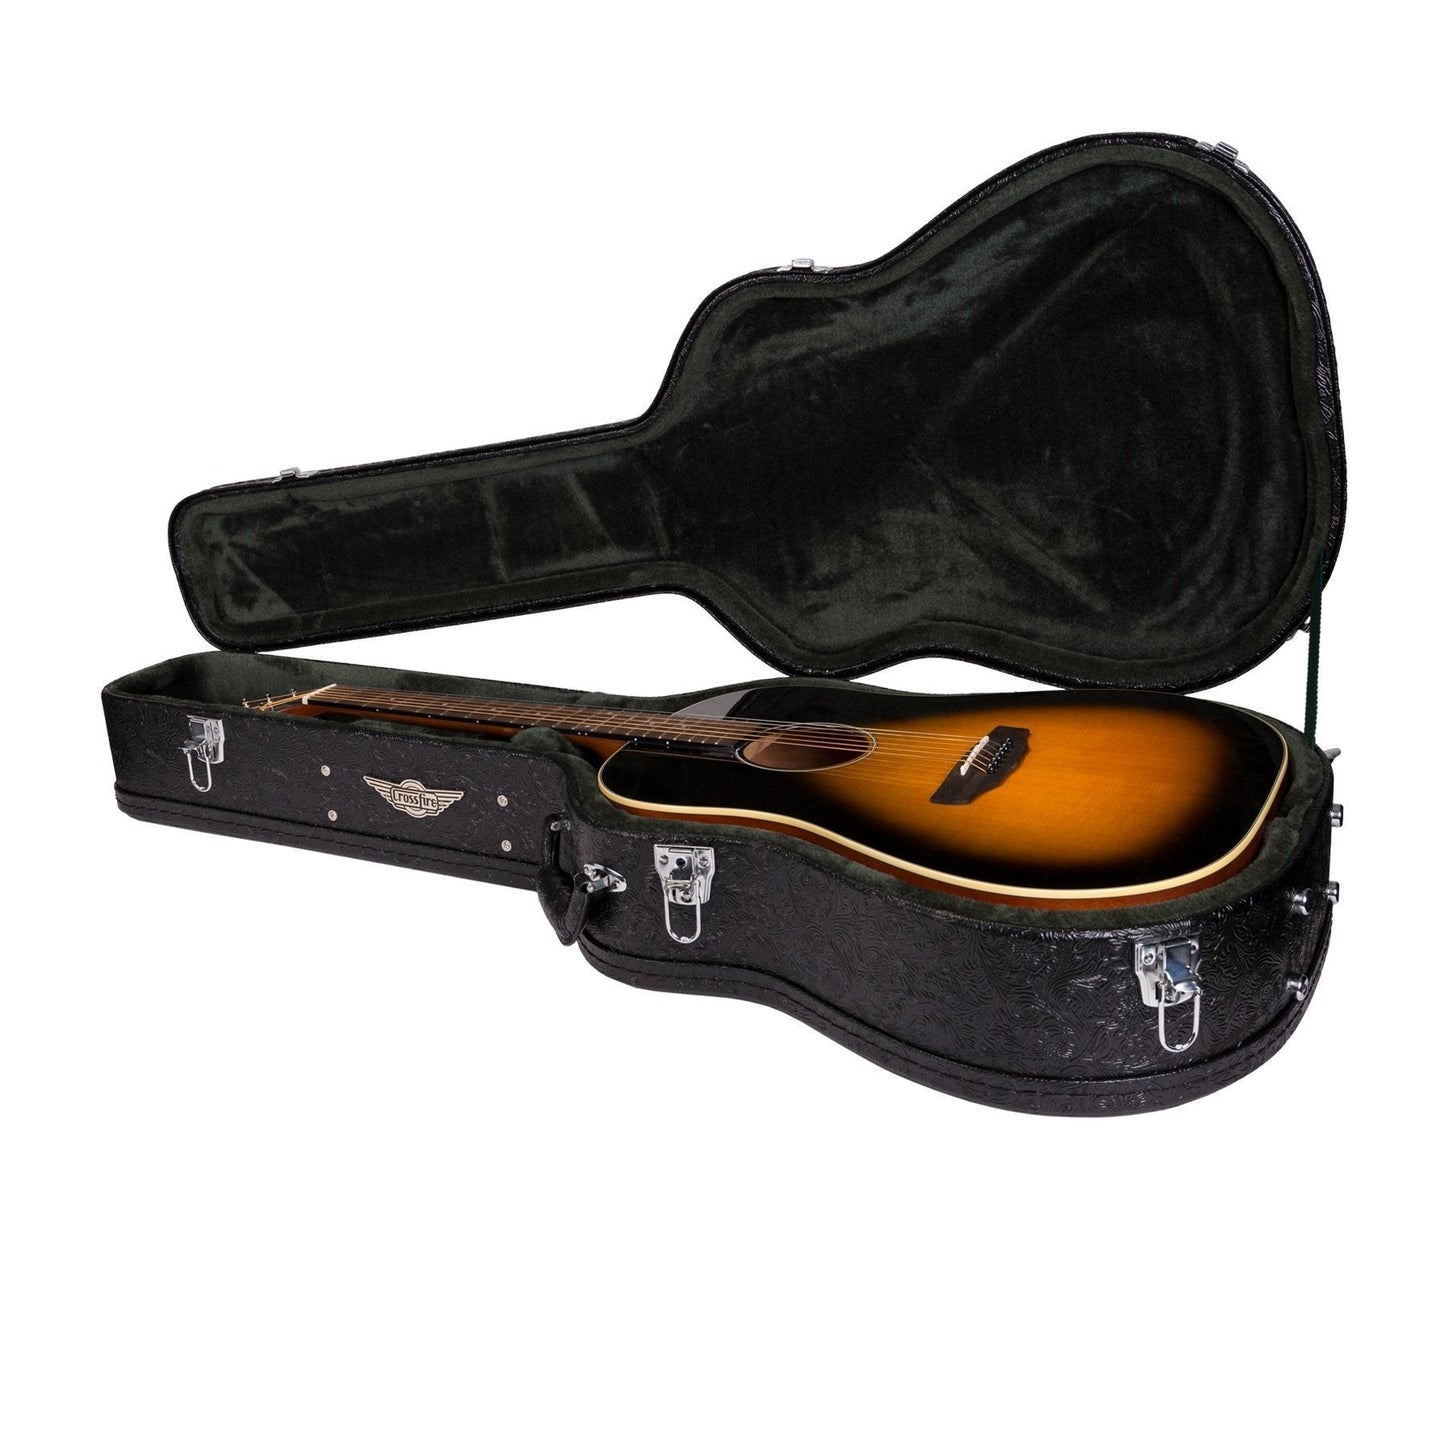 Crossfire Deluxe Shaped Dreadnought Acoustic Guitar Hard Case (Paisley Black)